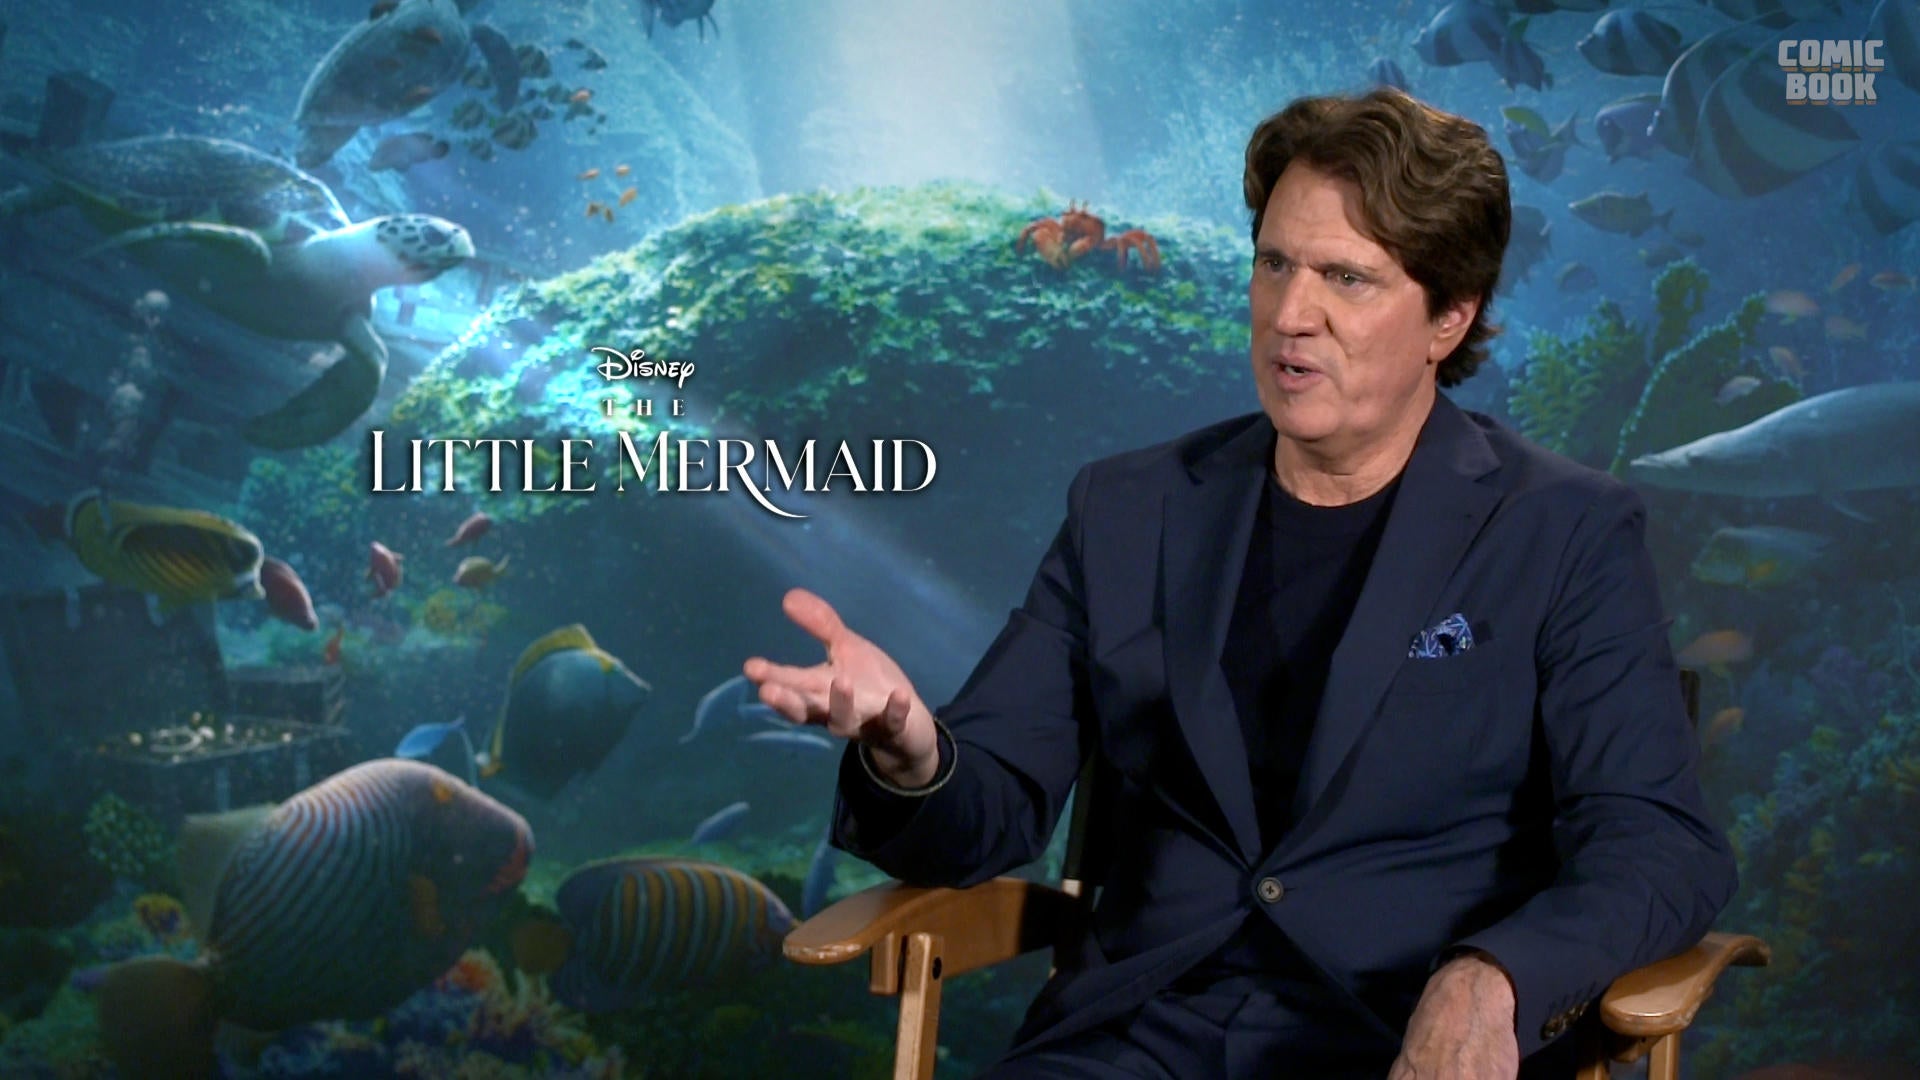 The Little Mermaid's Rob Marshall Reveals Dream Directing Project